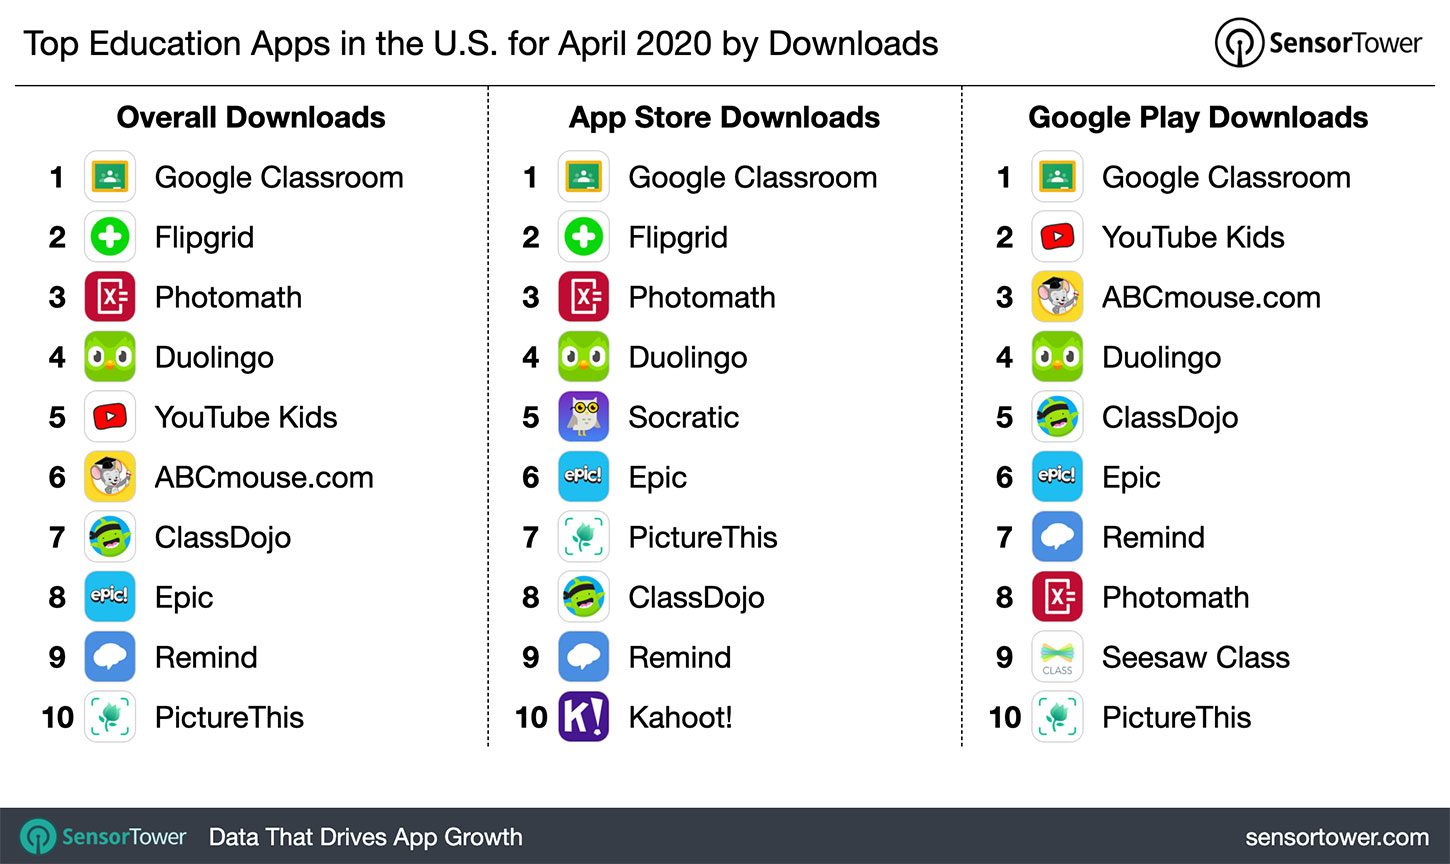 Top Education Apps in the U.S. for April 2020 by Downloads